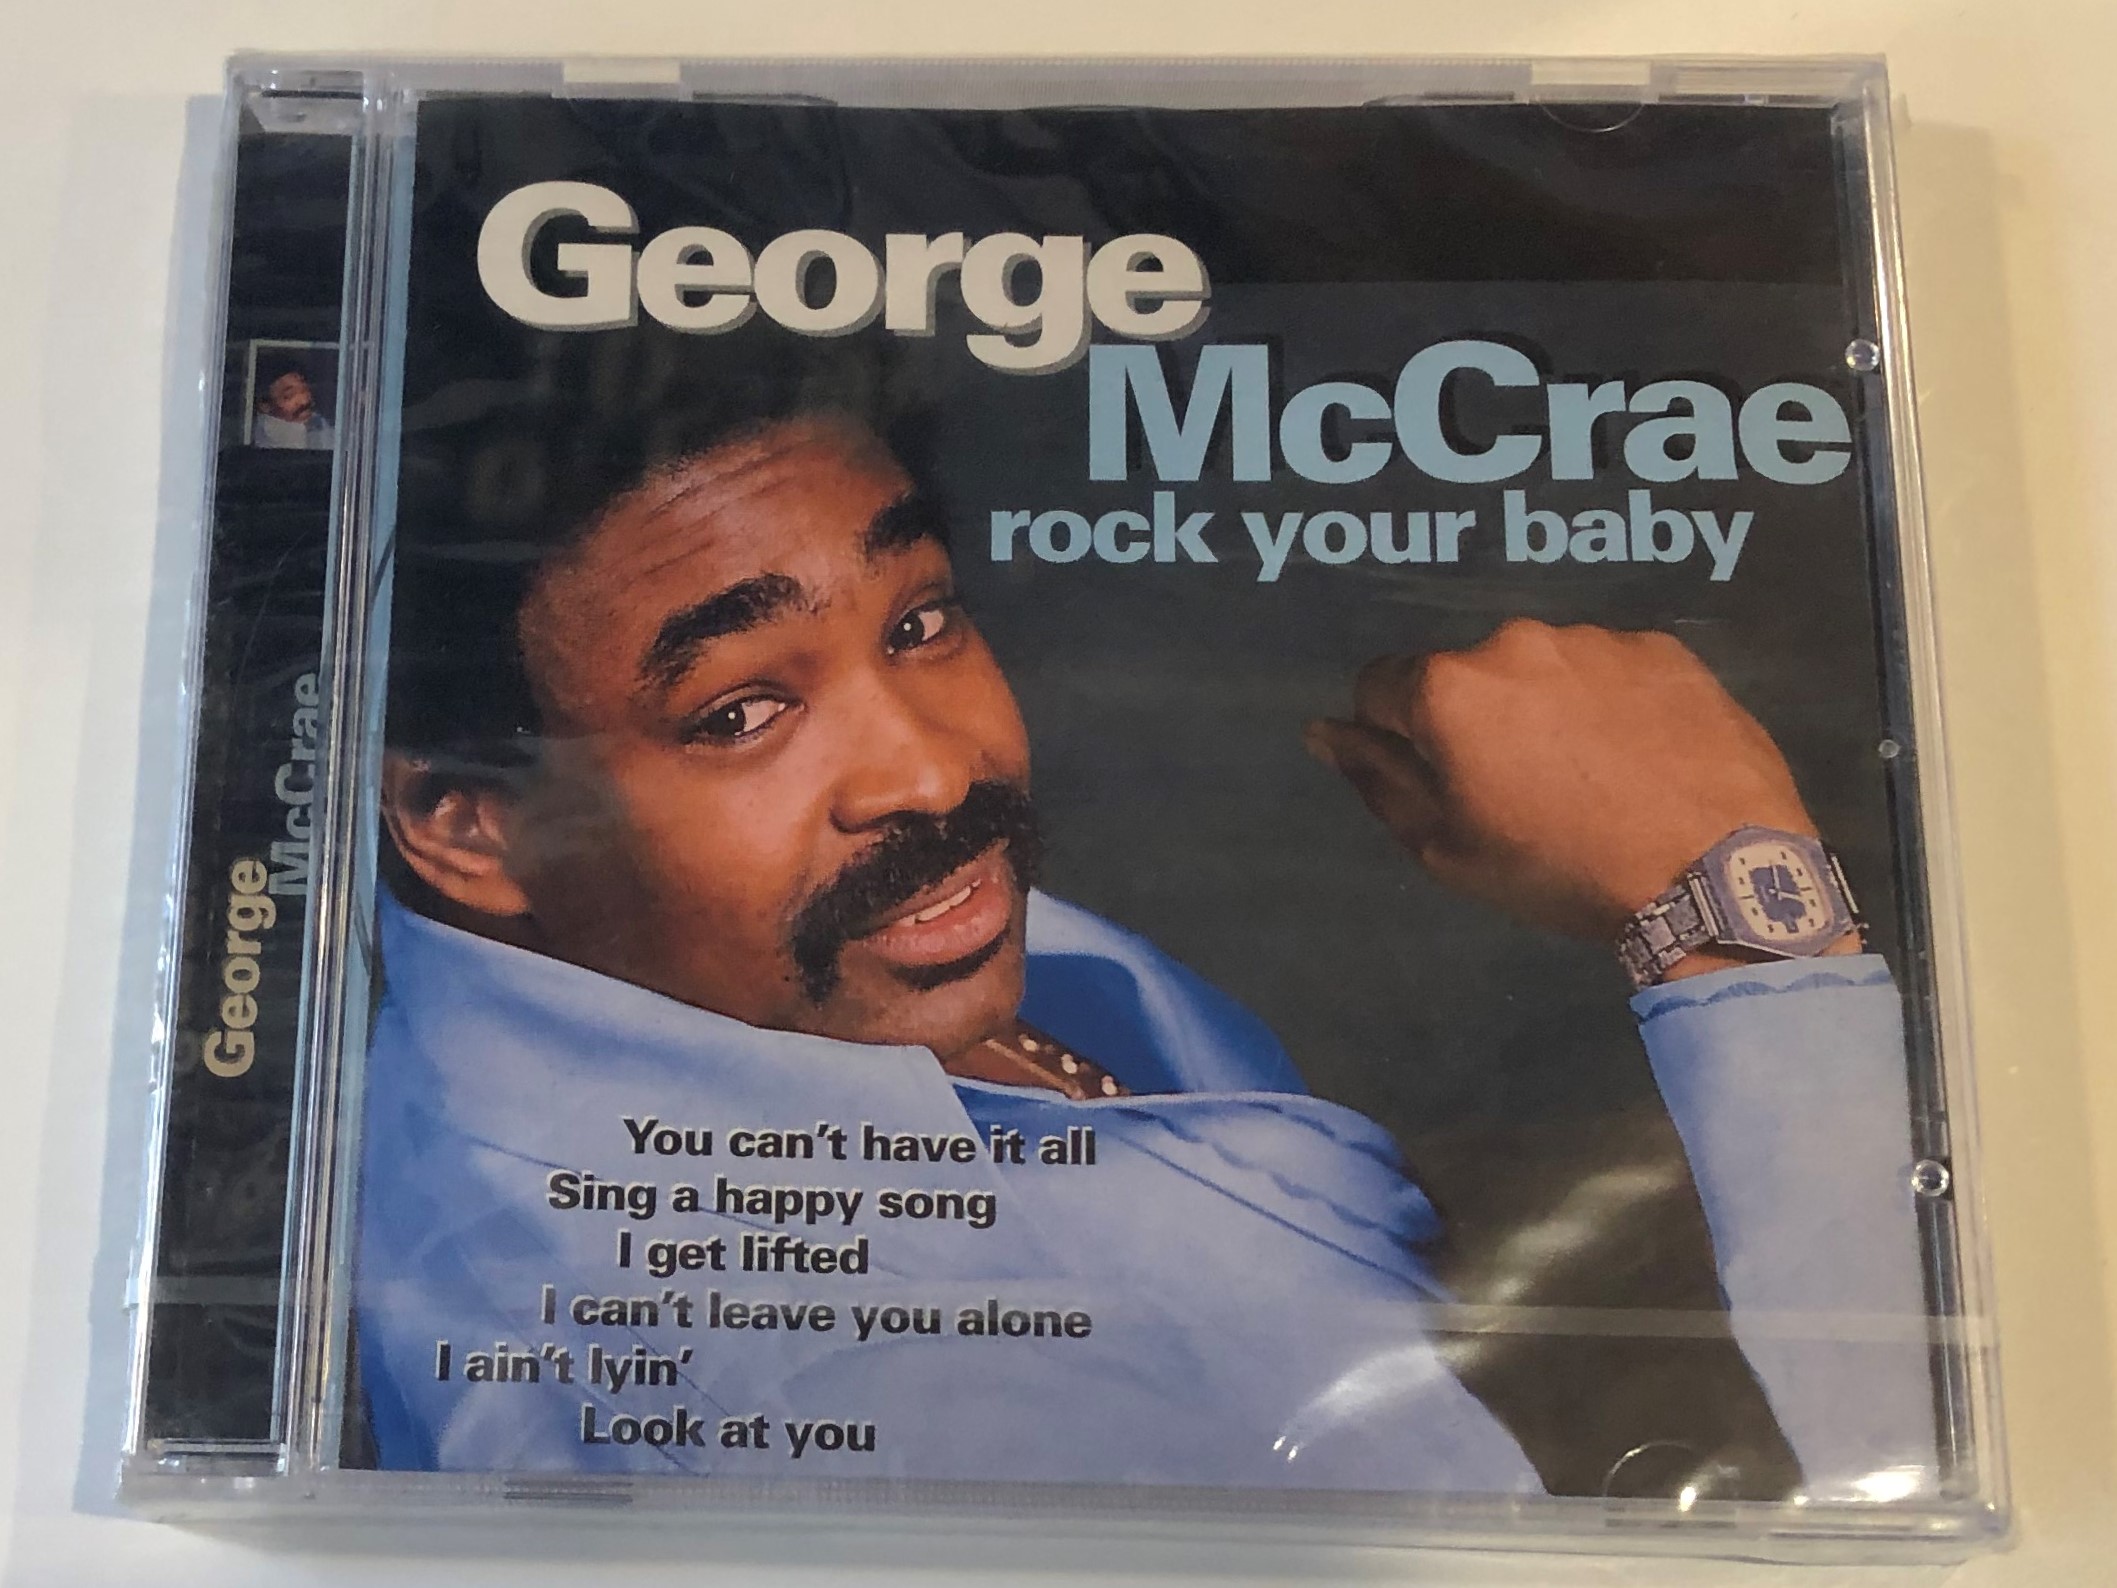 george-mccrae-rock-your-baby-you-can-have-it-all-sing-a-happy-song-i-get-lifted-i-can-t-leave-you-alone-i-ain-t-lyin-look-at-you-disky-audio-cd-1997-dc-882762-1-.jpg